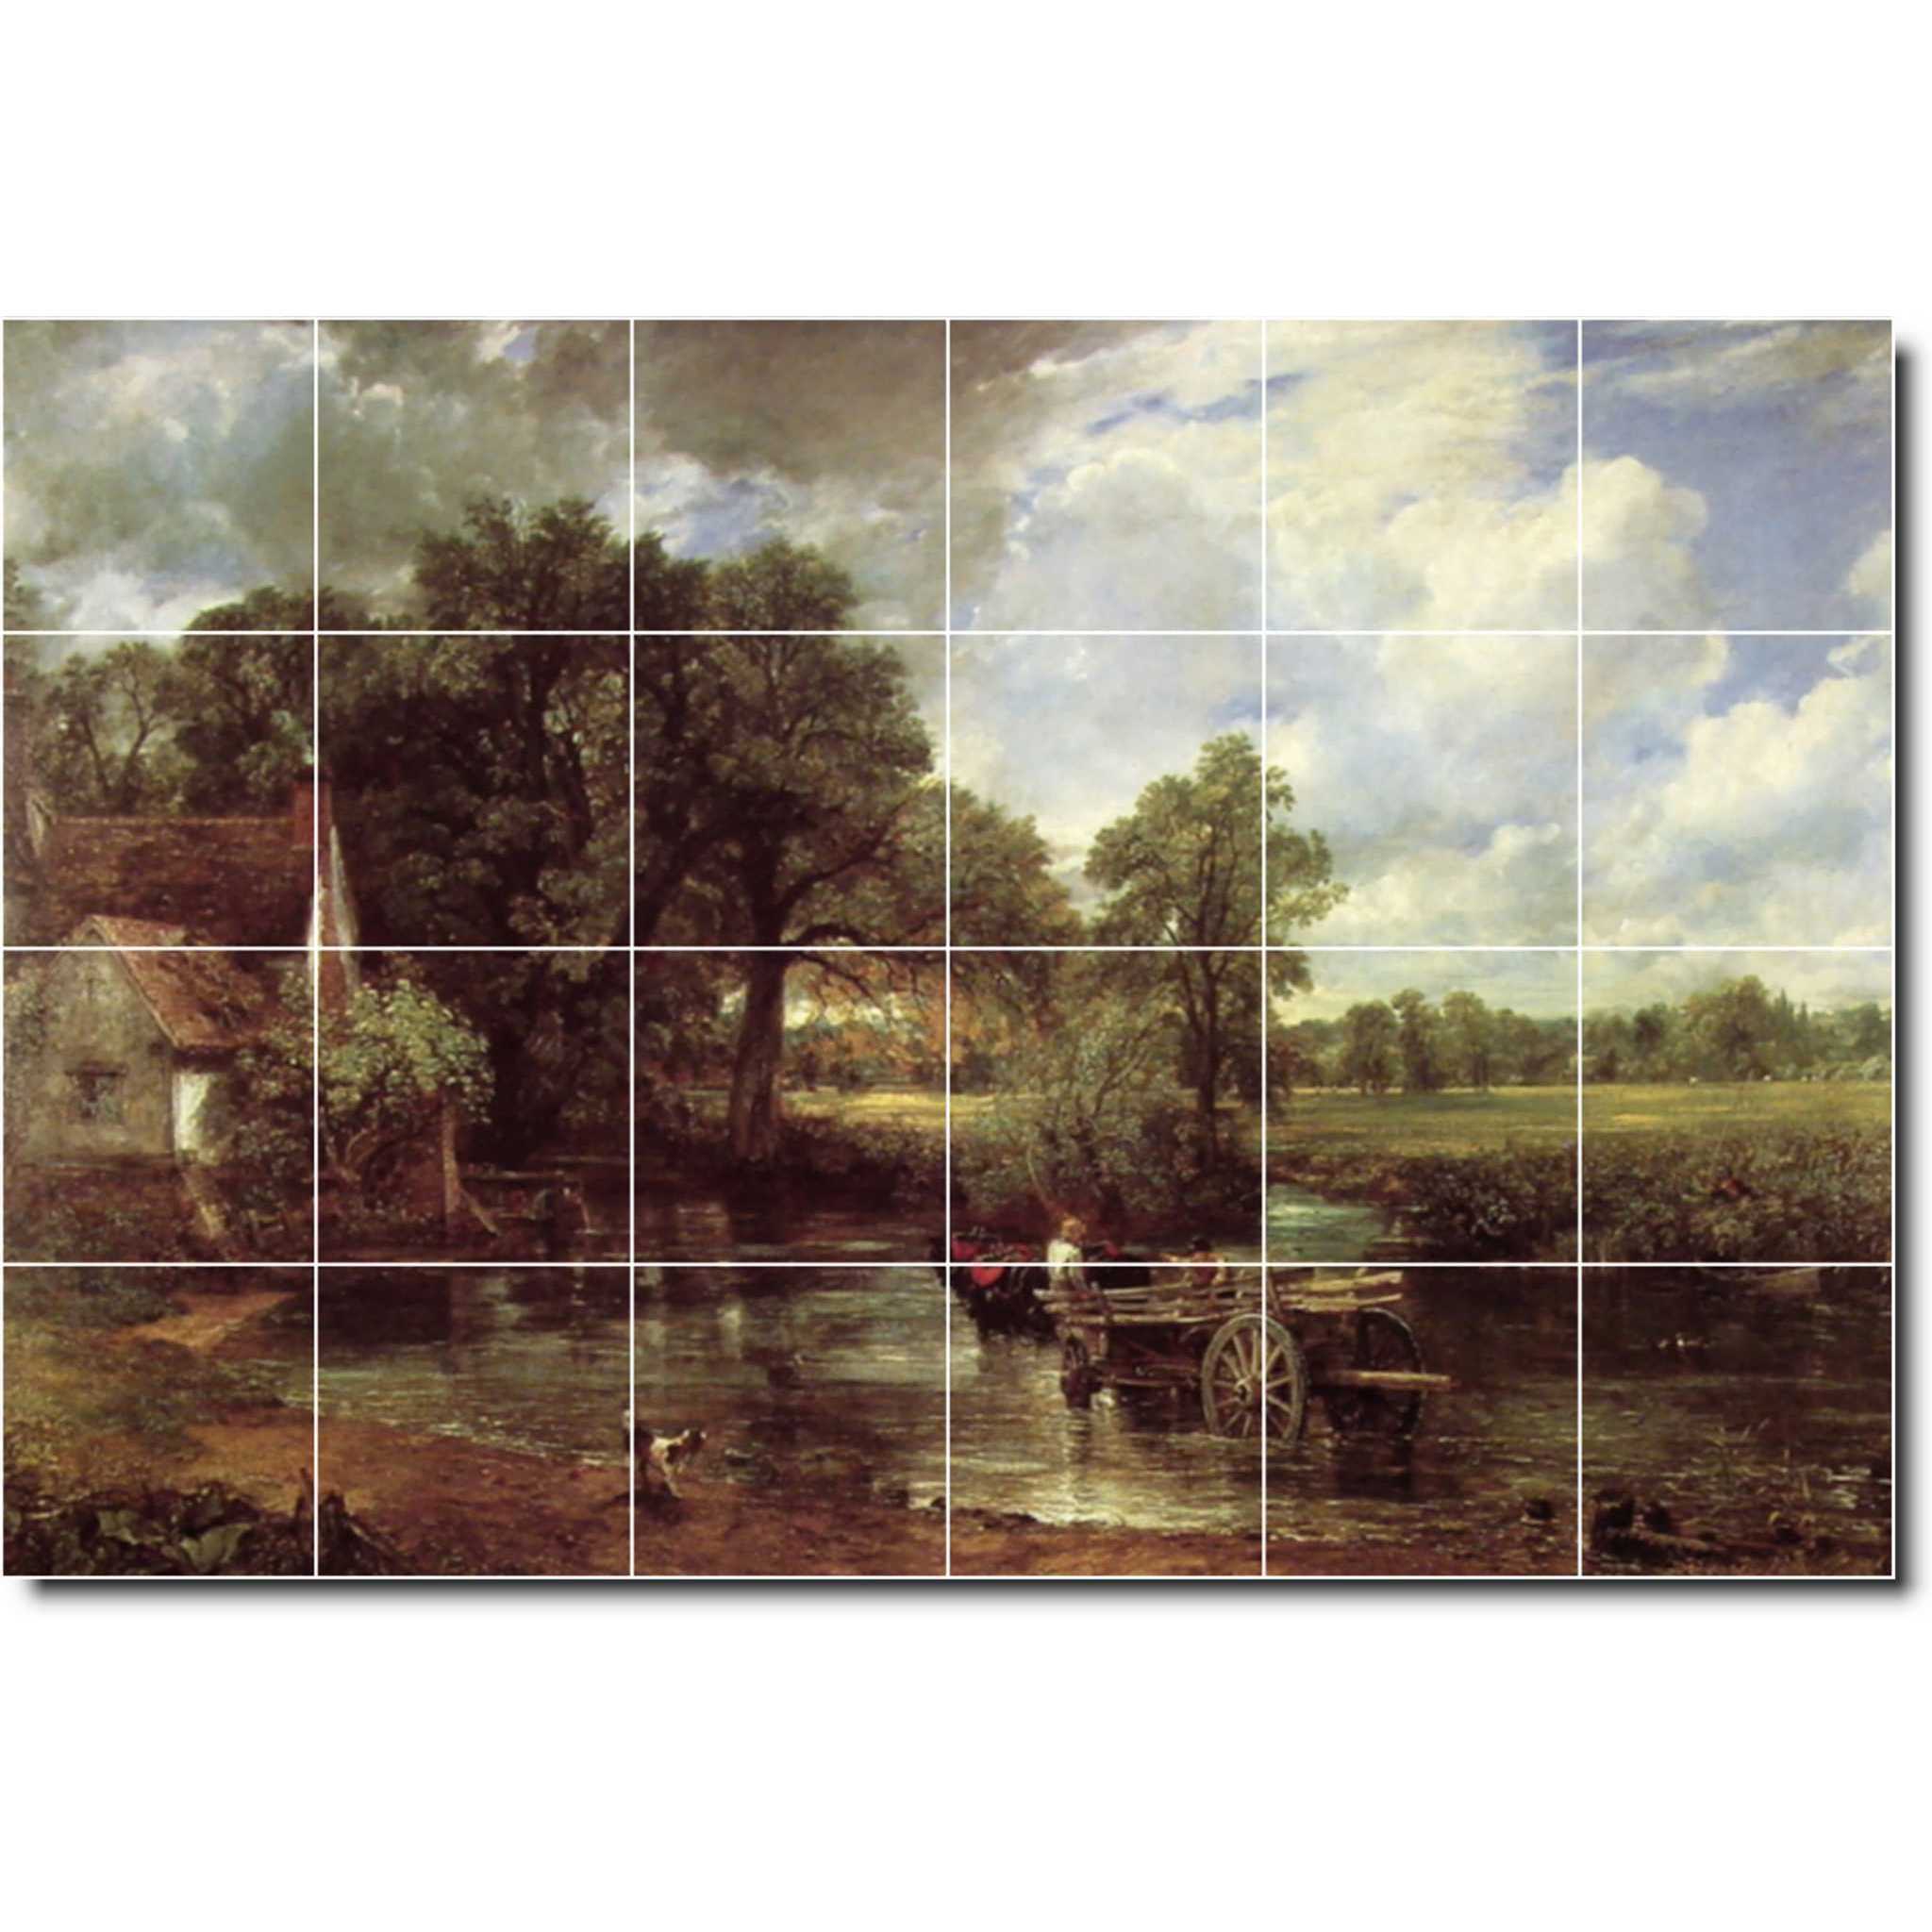 Picture-Tiles.com Ceramic Tile Mural John Constable Country Painting PT01962. (4) Sizes Available